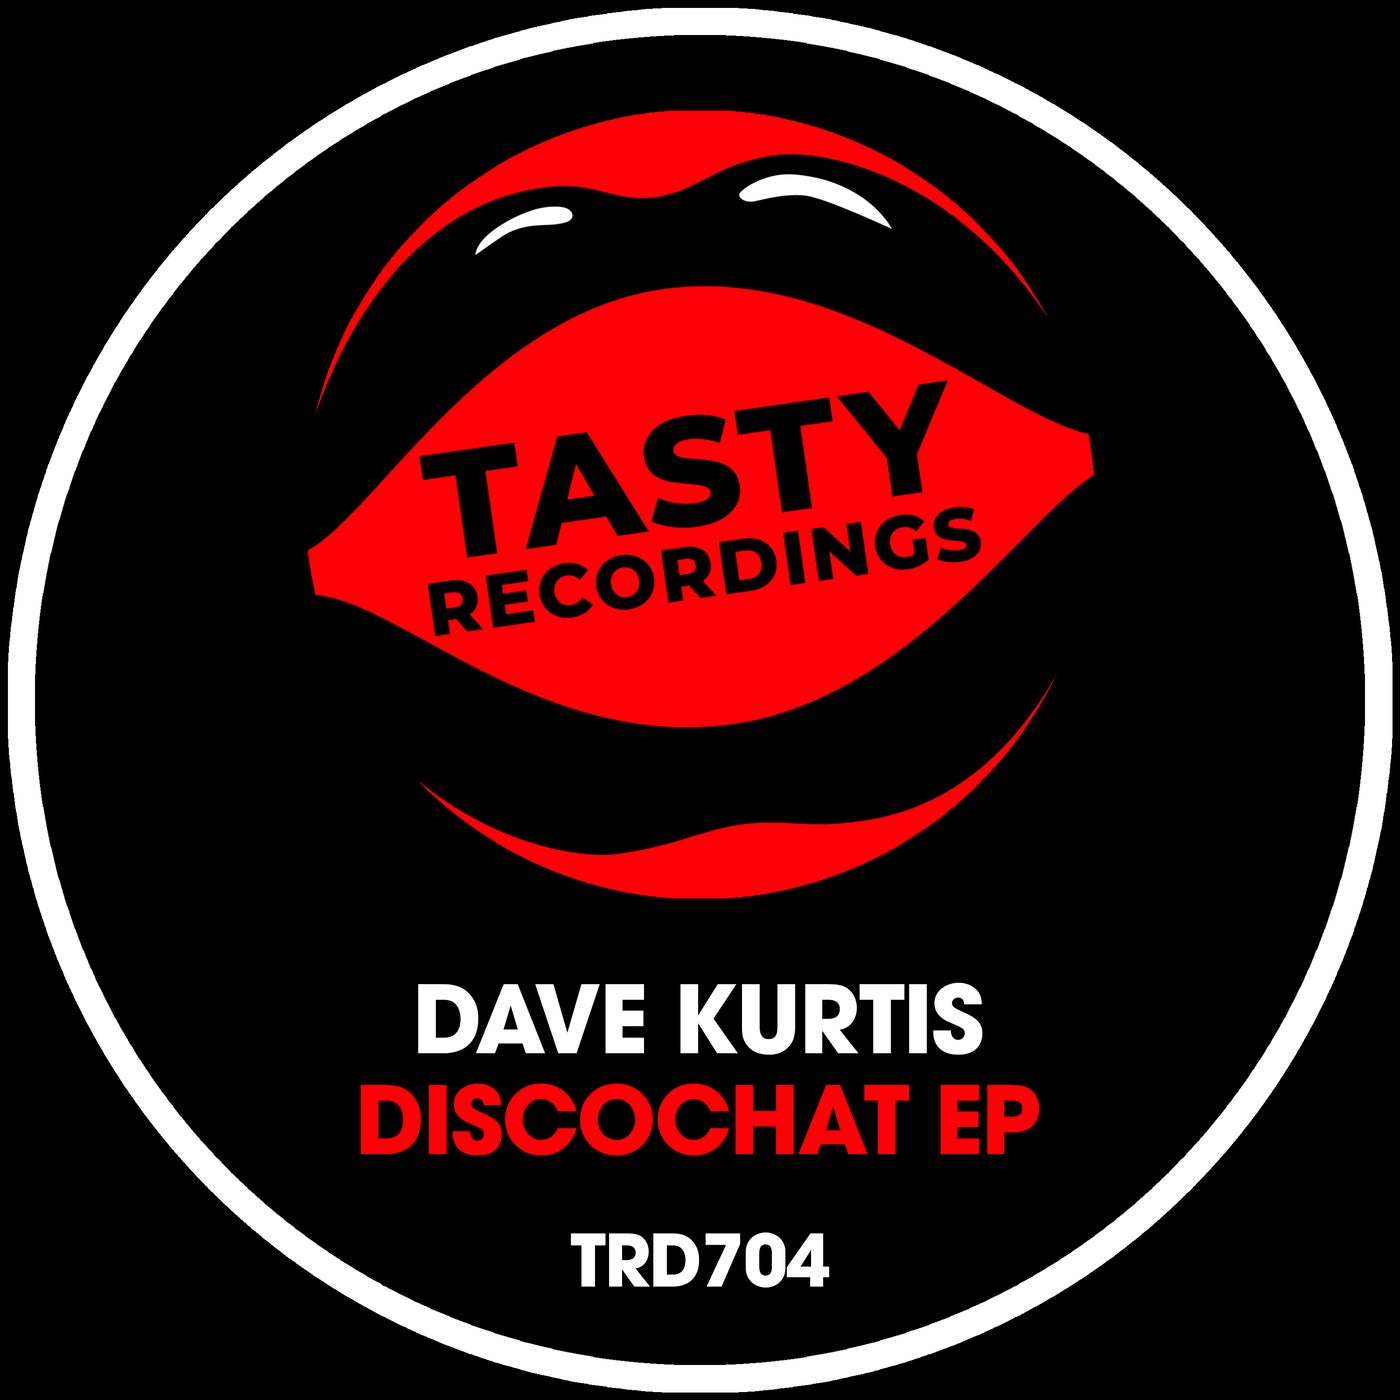 Discochat EP